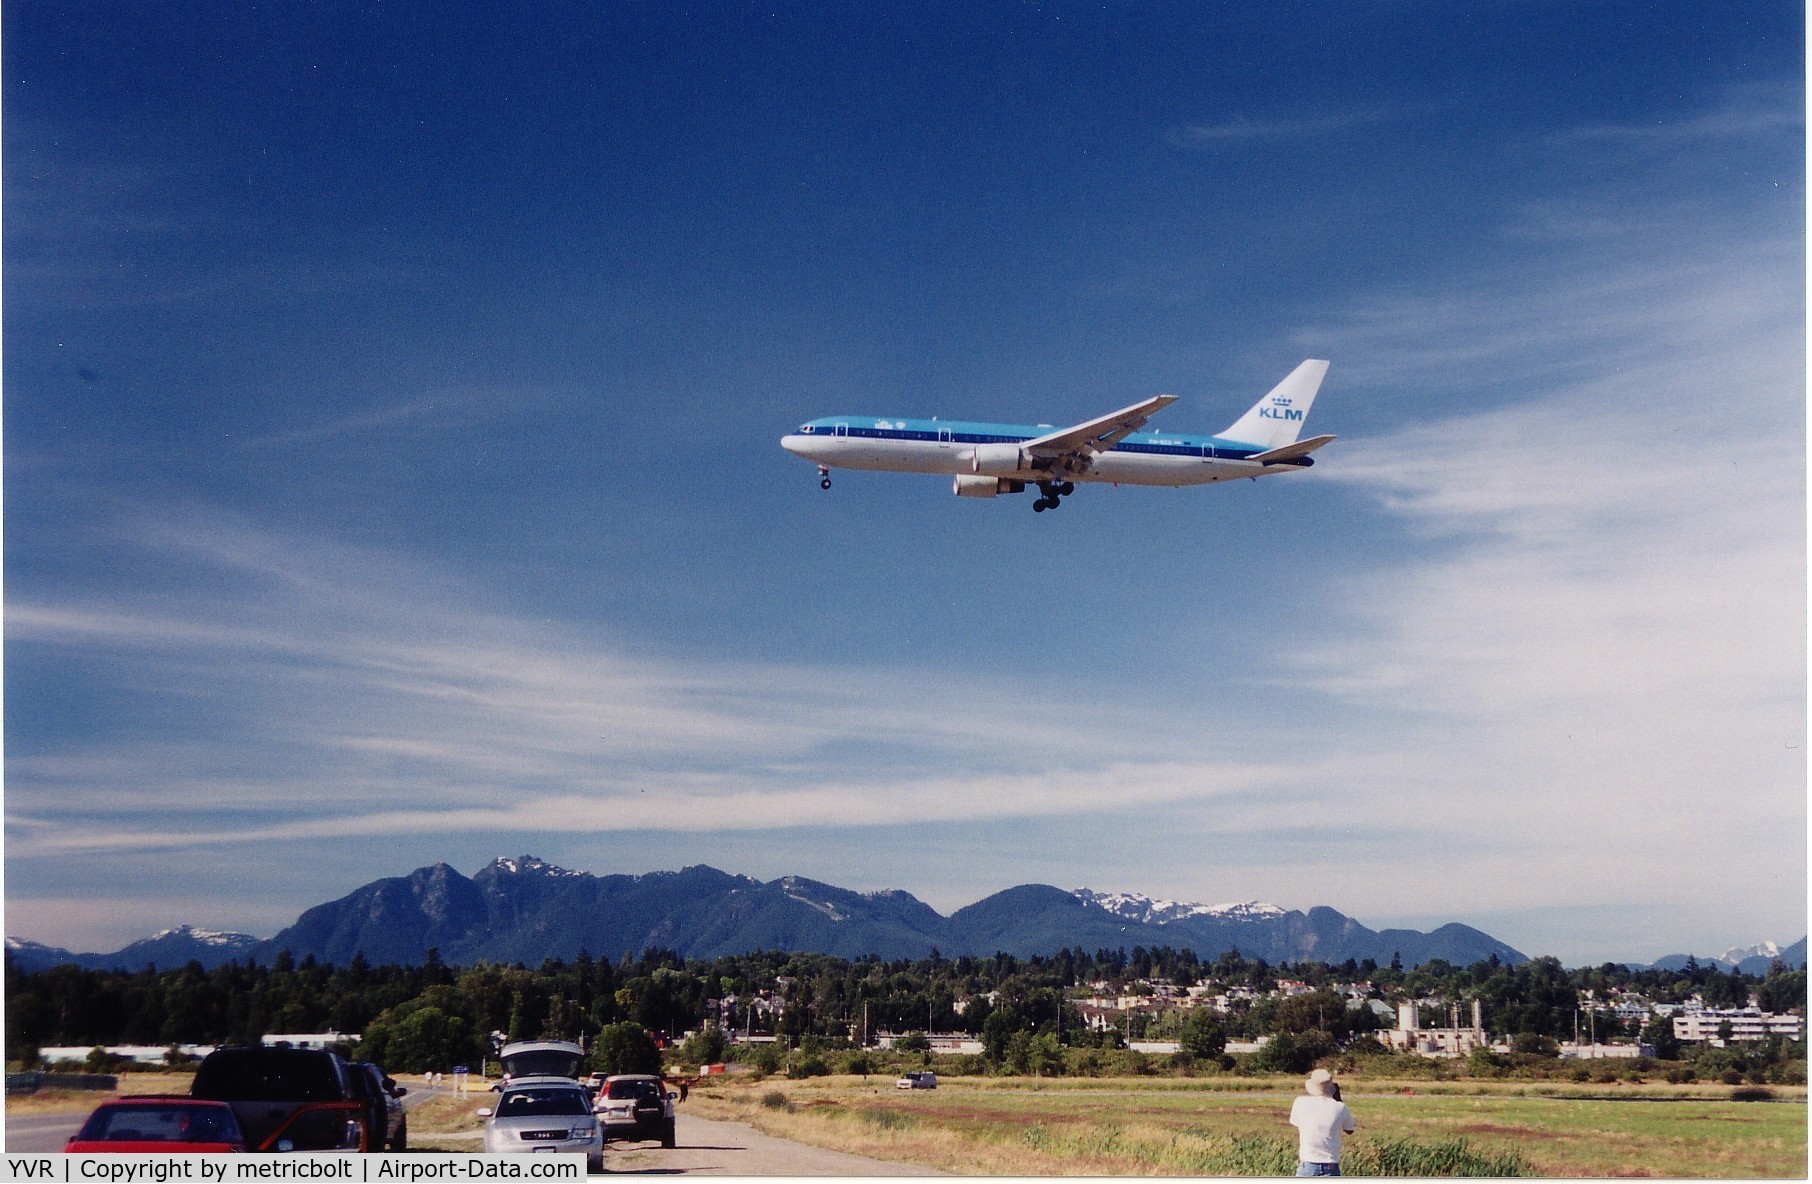 Vancouver International Airport, Vancouver, British Columbia Canada (YVR) - KLM B767 from AMS,Jul.2002.Taken at the Templeton Rd. spotting area